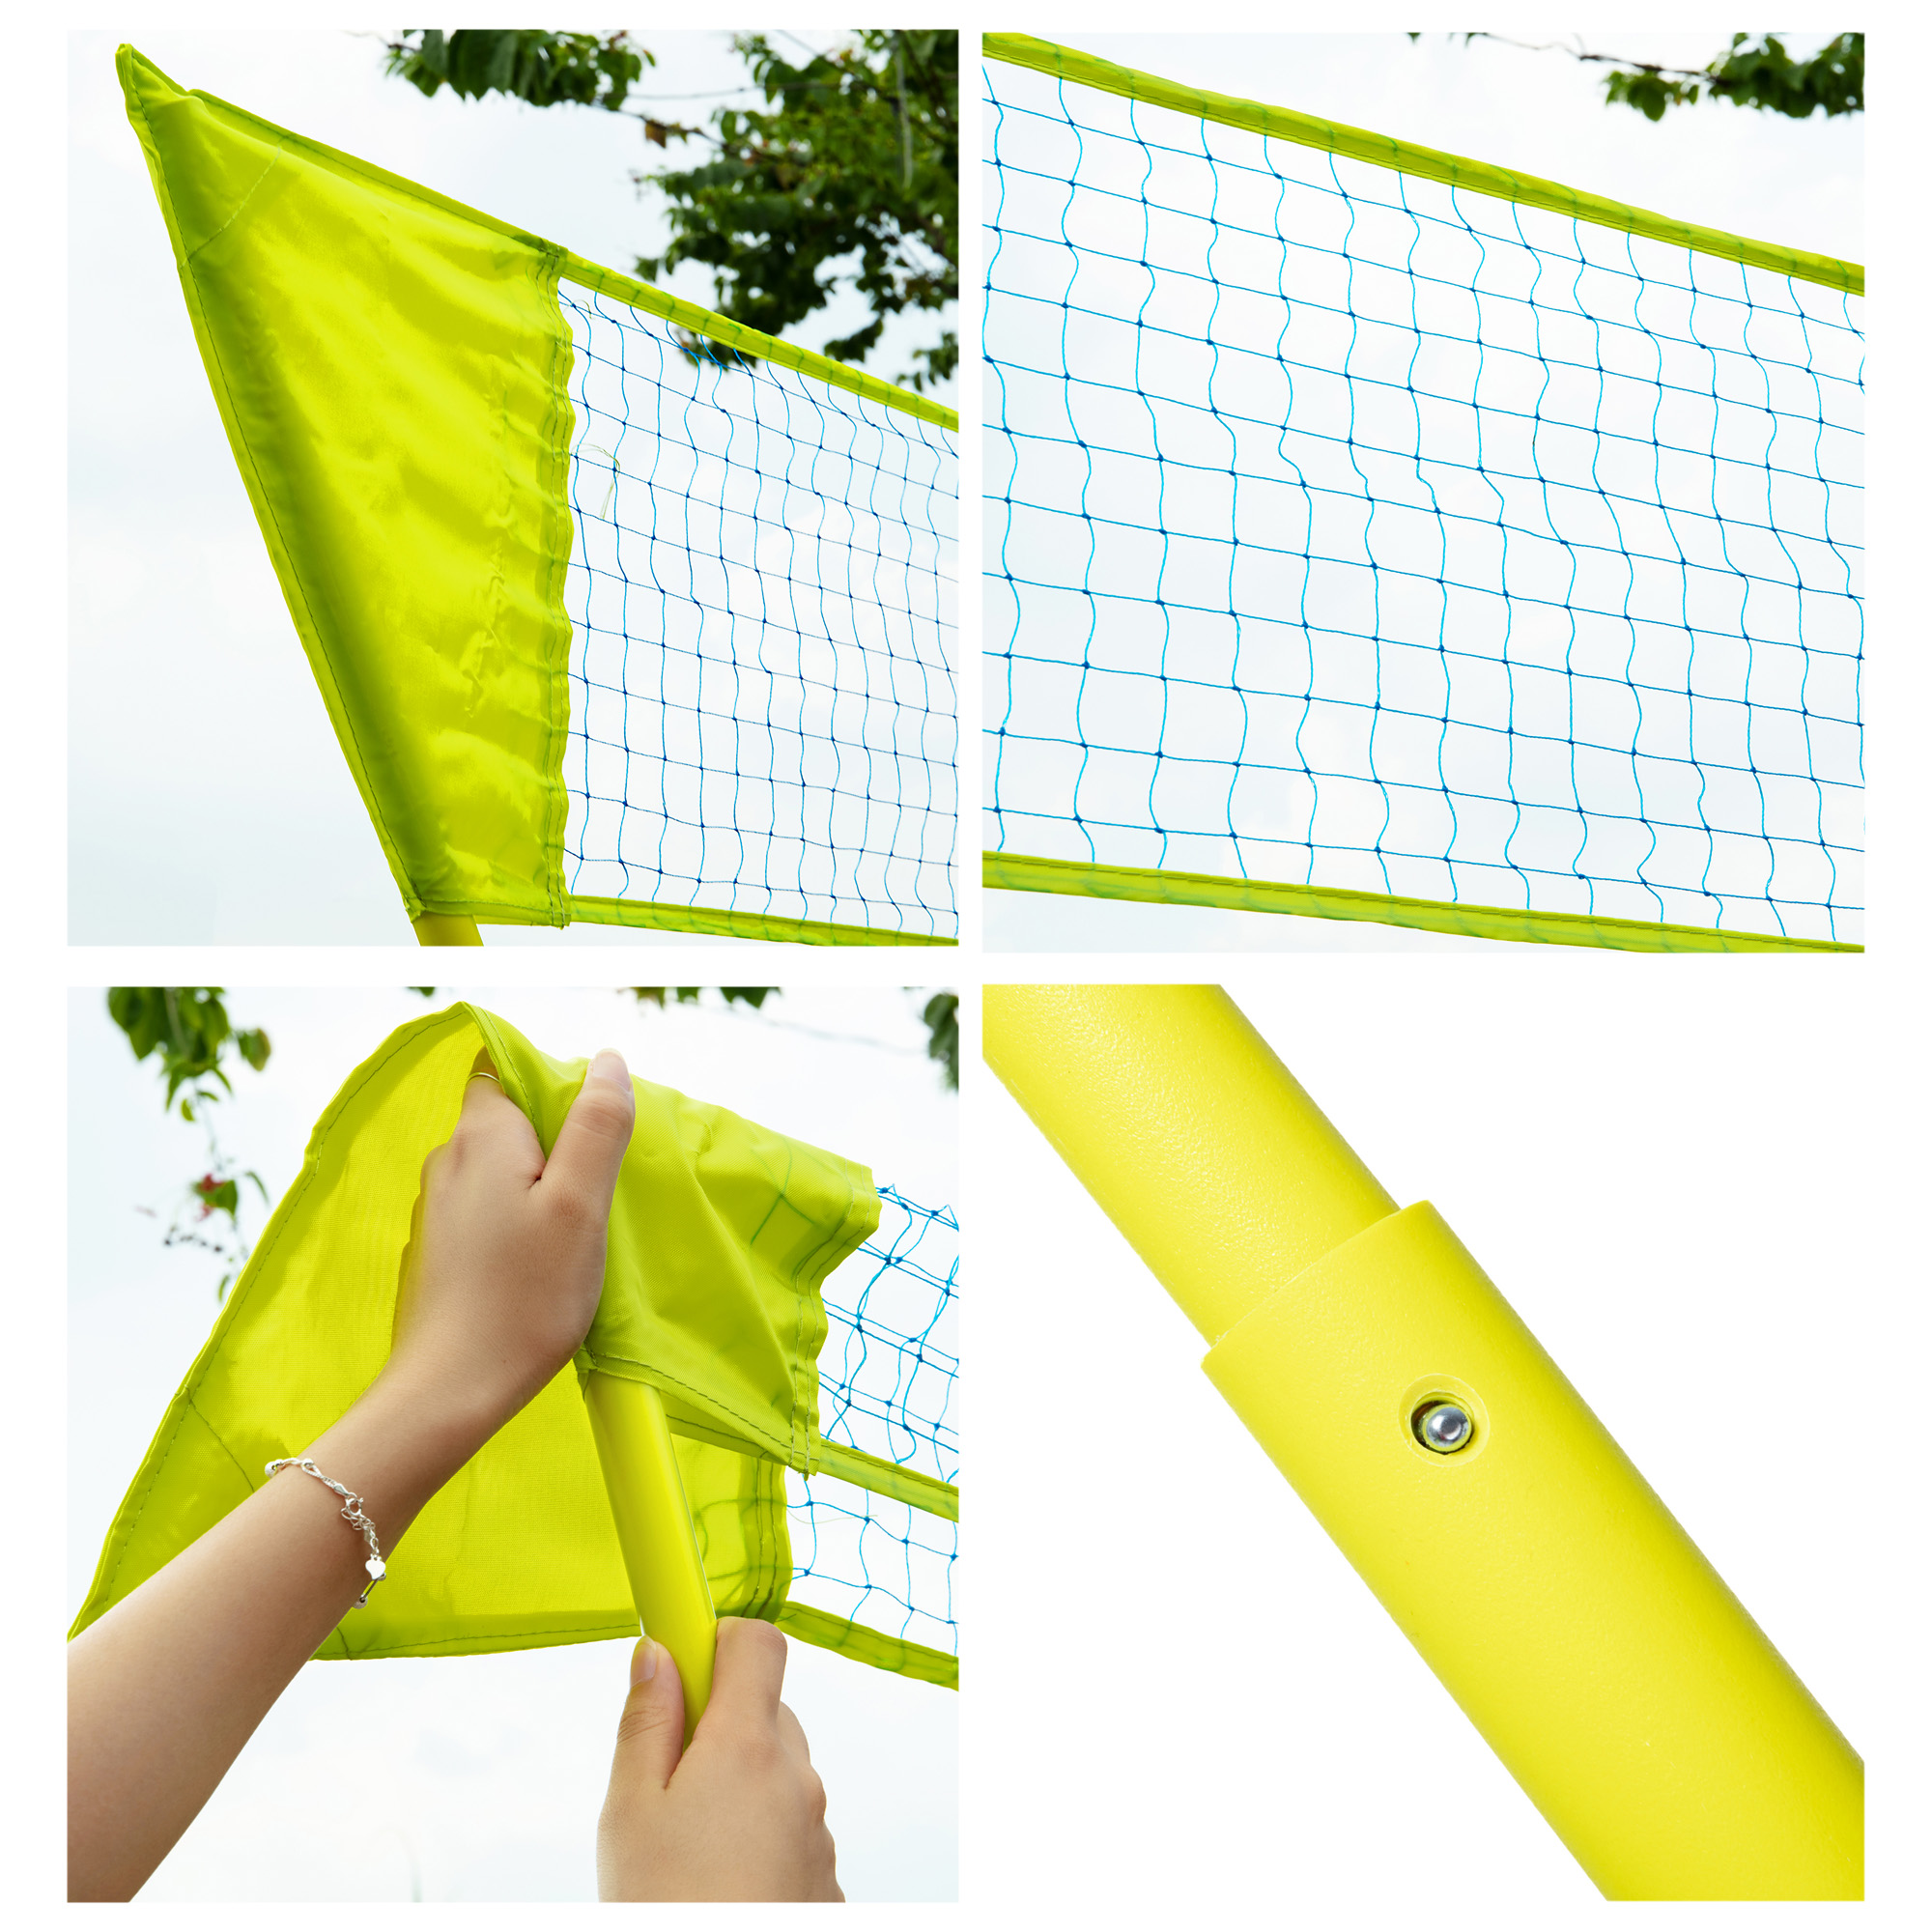 SAYFUT Badminton Set, Portable Volleyball Kit Recreation Game Equipment with Freestanding Base and Carry Bag, for Youth Adult, for Beach, Garden, Park or Backyard - image 4 of 7